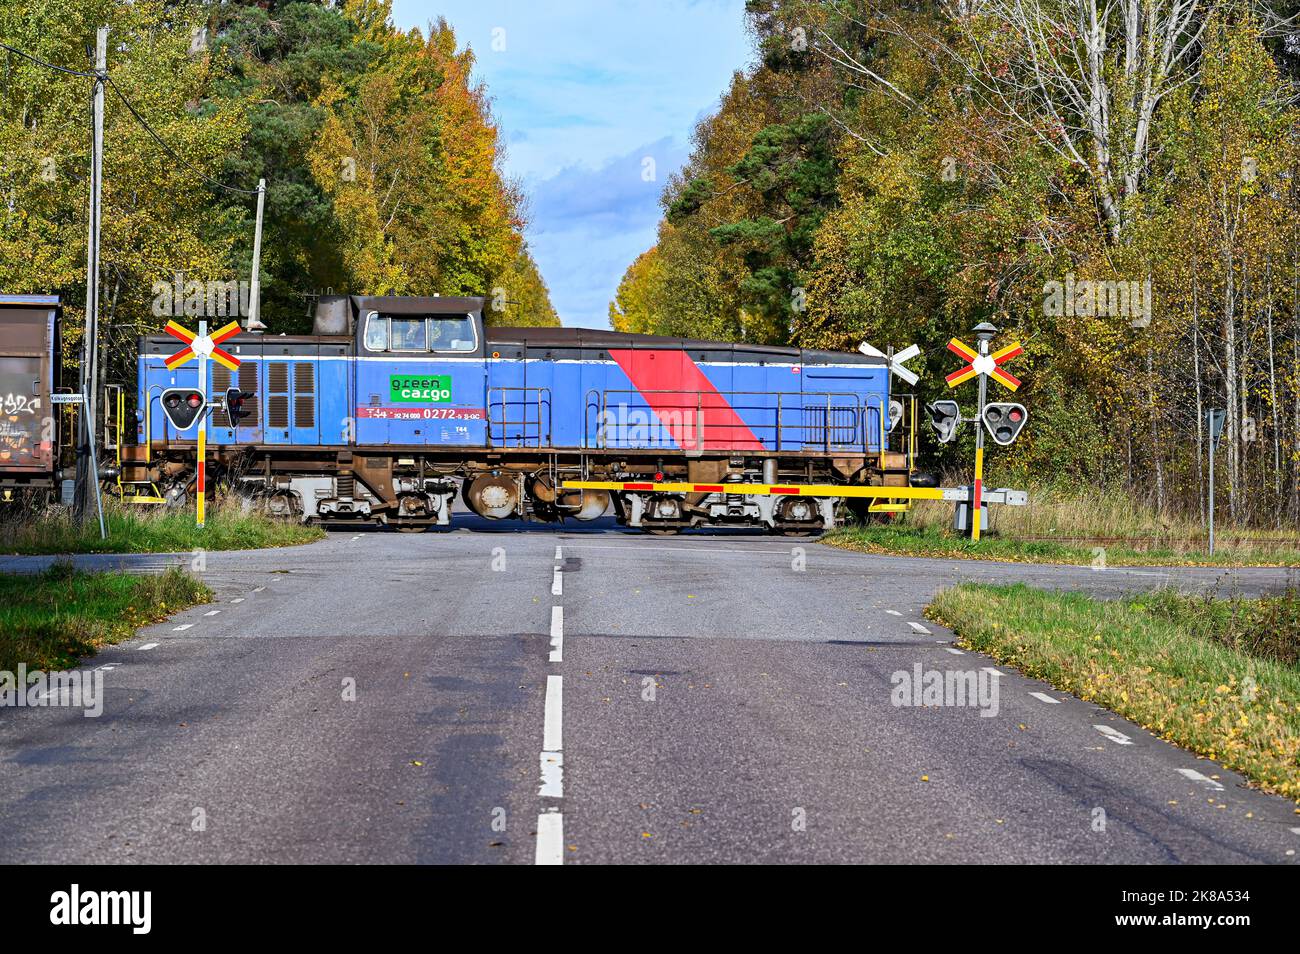 crossroad with trainset passing over asphalt road Stock Photo